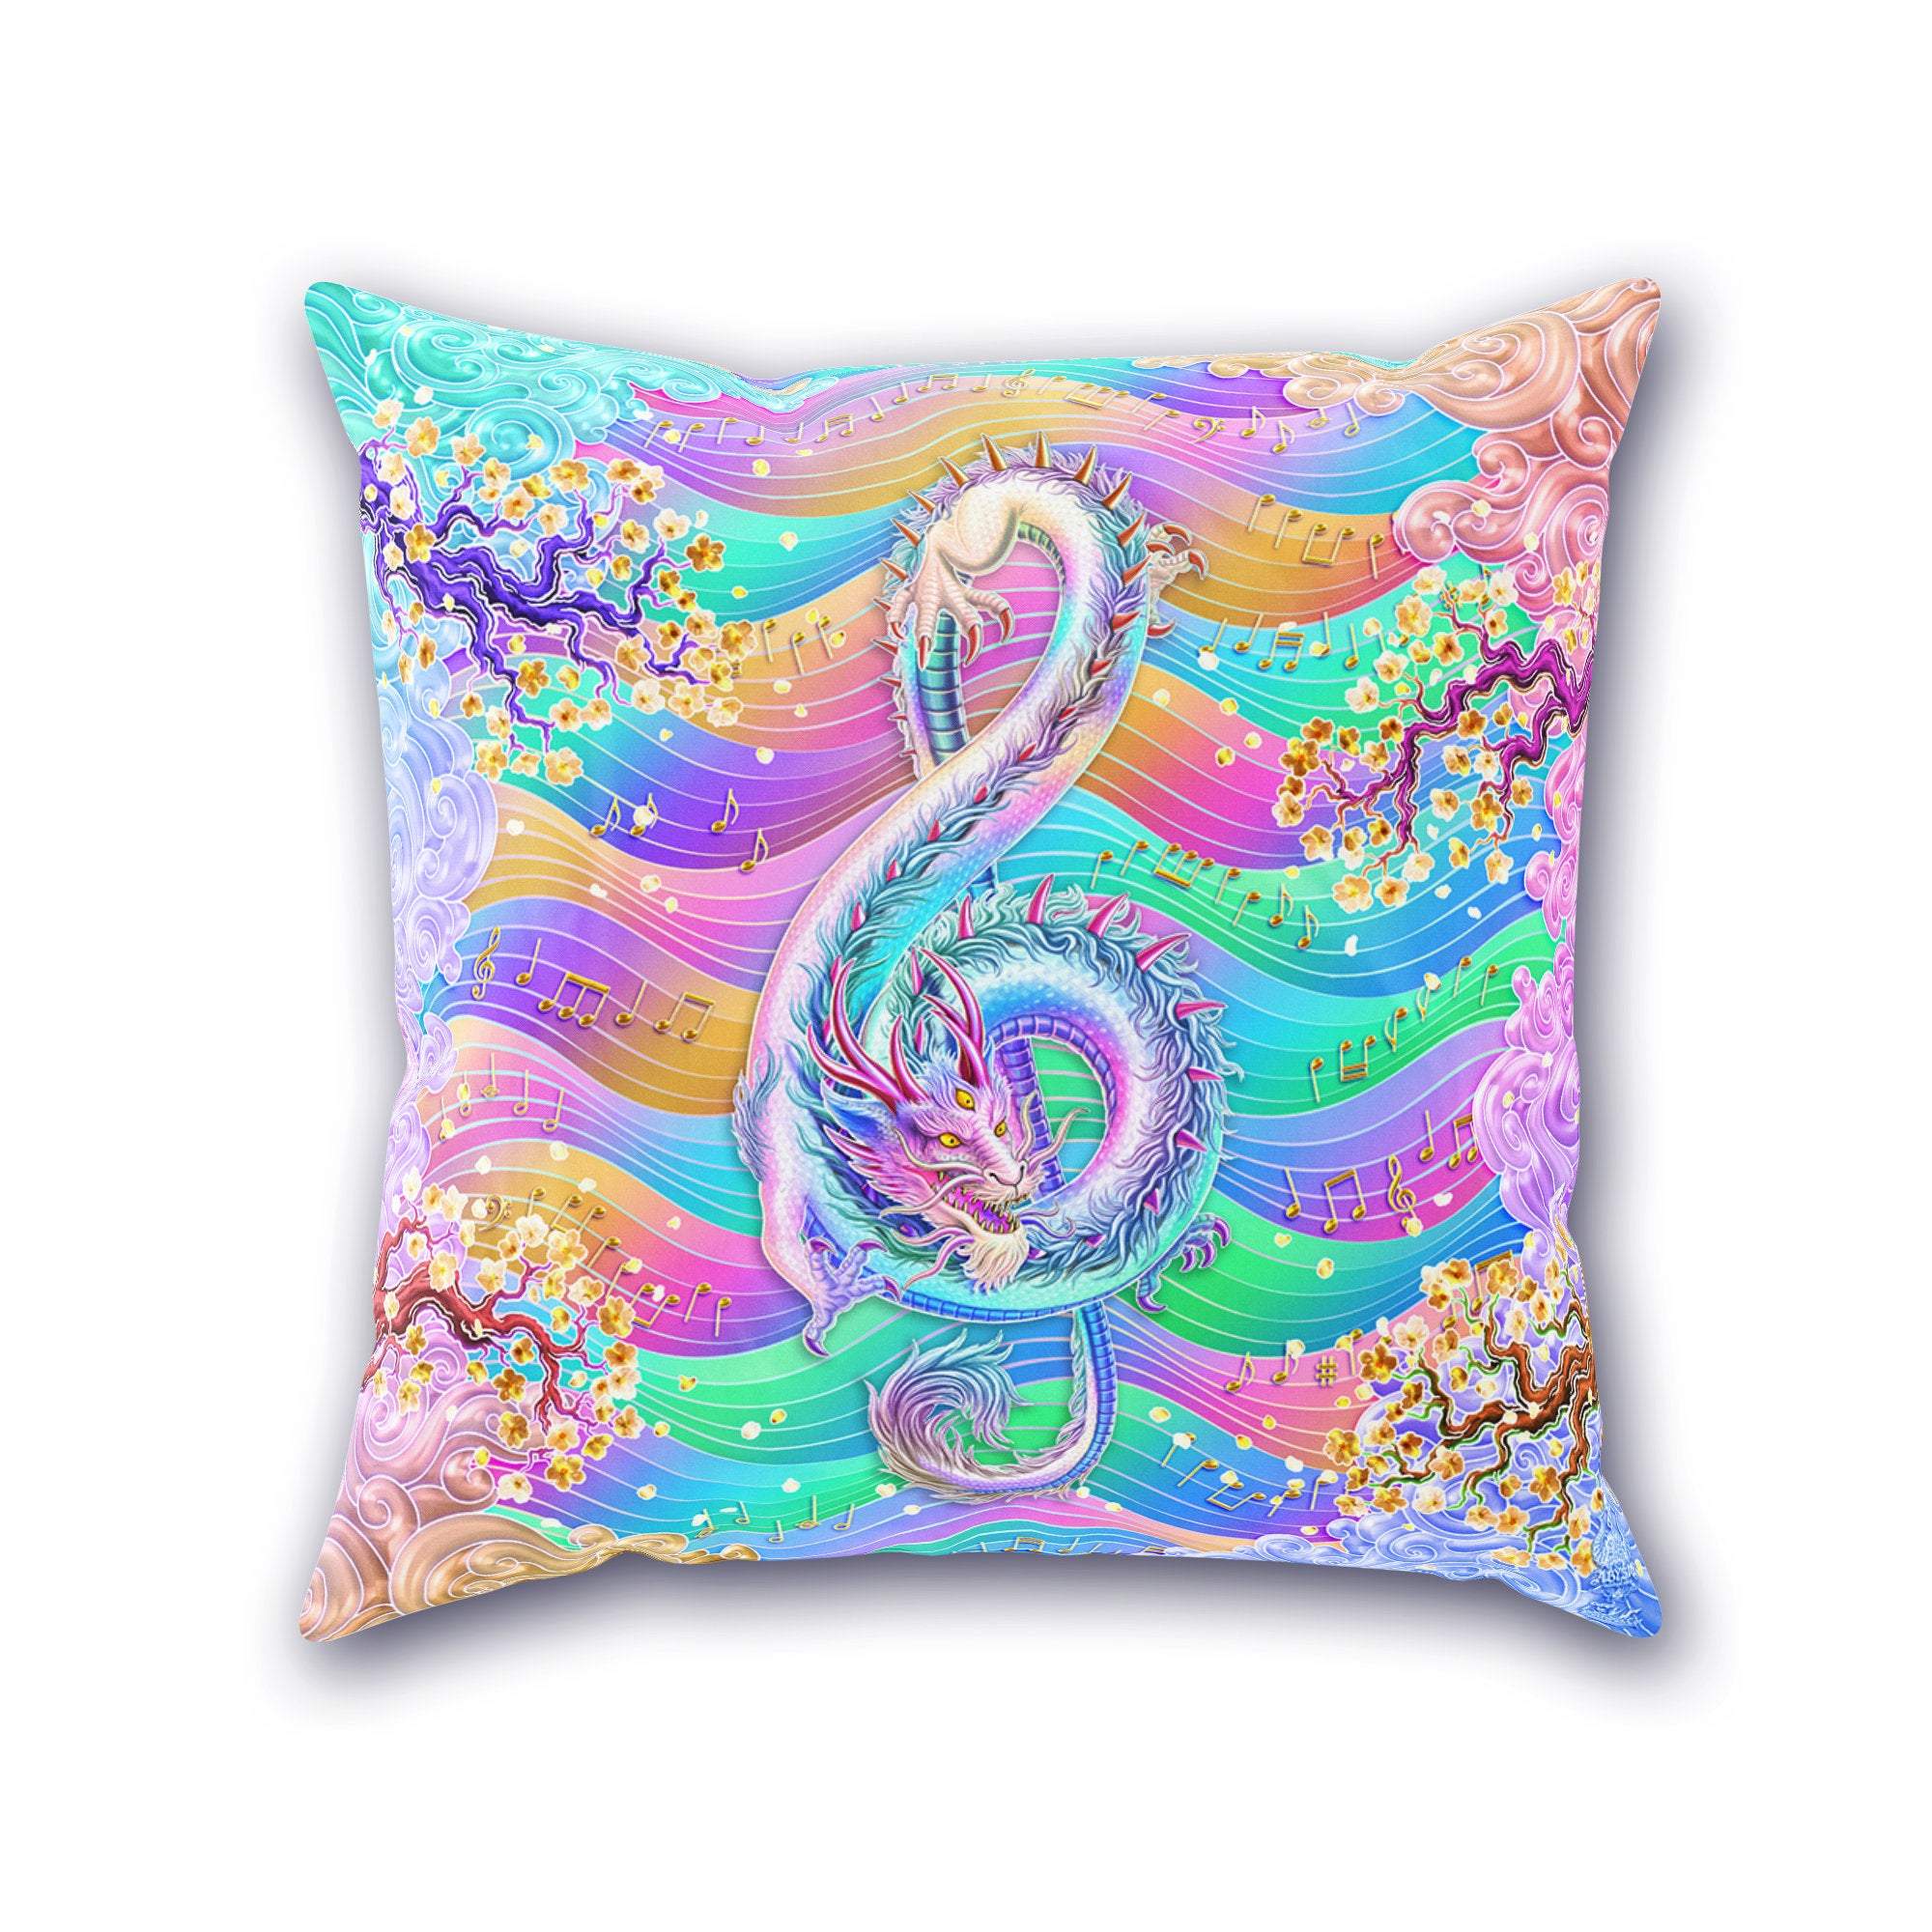 Holographic Throw Pillow, Decorative Accent Cushion, Aesthetic Room Decor, Music Art, Fairy Kei and Yume Kawaii style, Funky and Eclectic Home - Treble Clef, Pastel Dragon - Abysm Internal